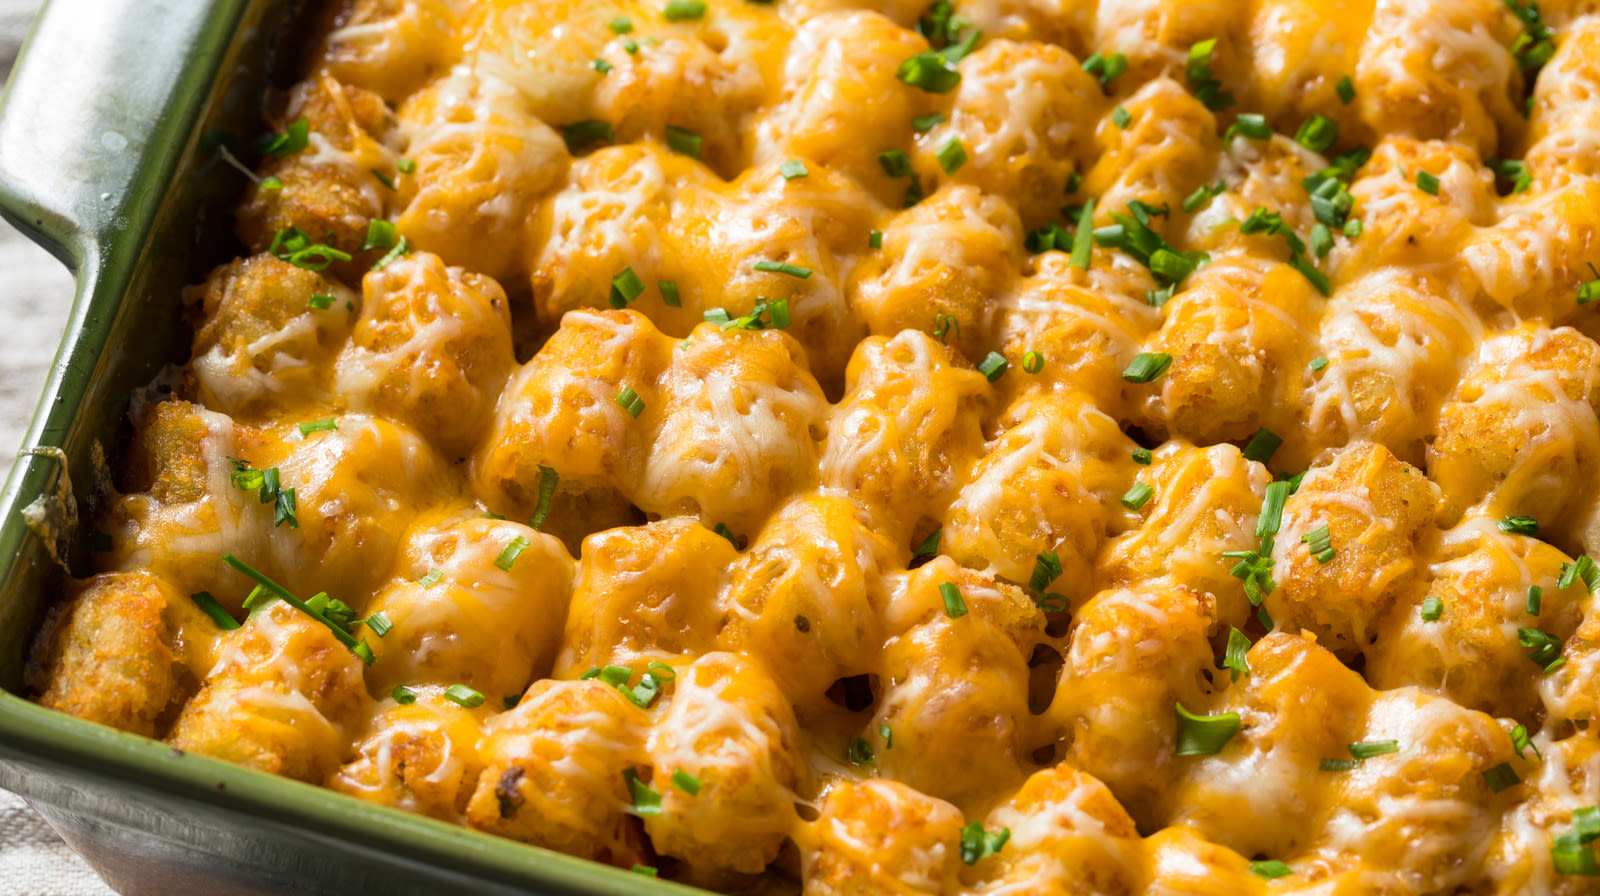 Give Tater Tot Casserole An Upgrade With Burger-Inspired Additions